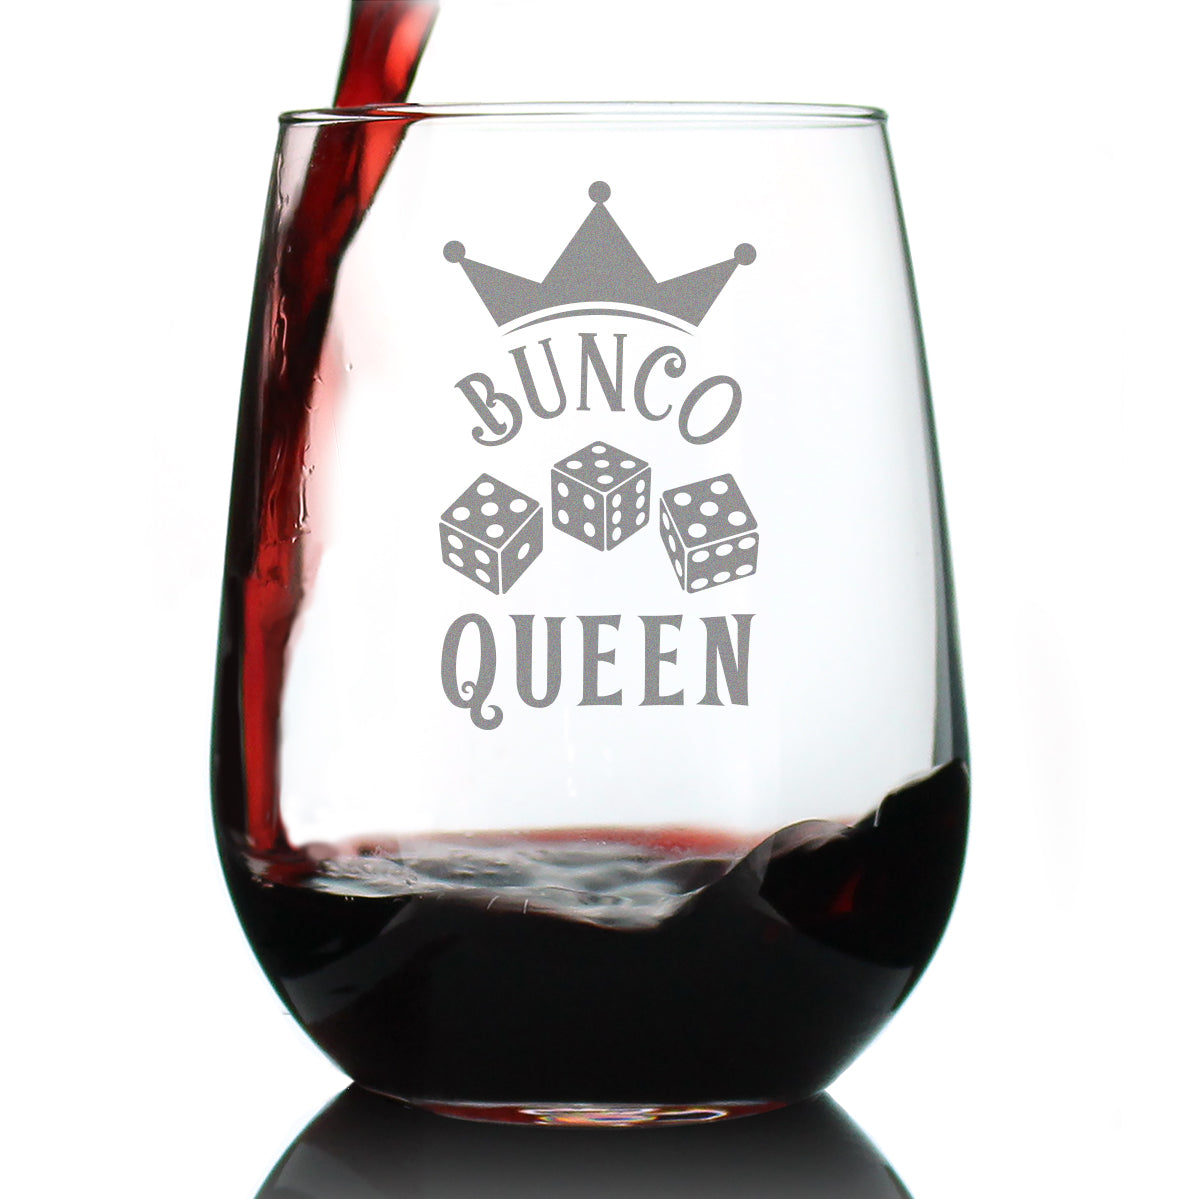 Bunco Queen Stemless Wine Glass - Bunco Decor and Bunco Gifts for Women - Large 17 Oz Glasses